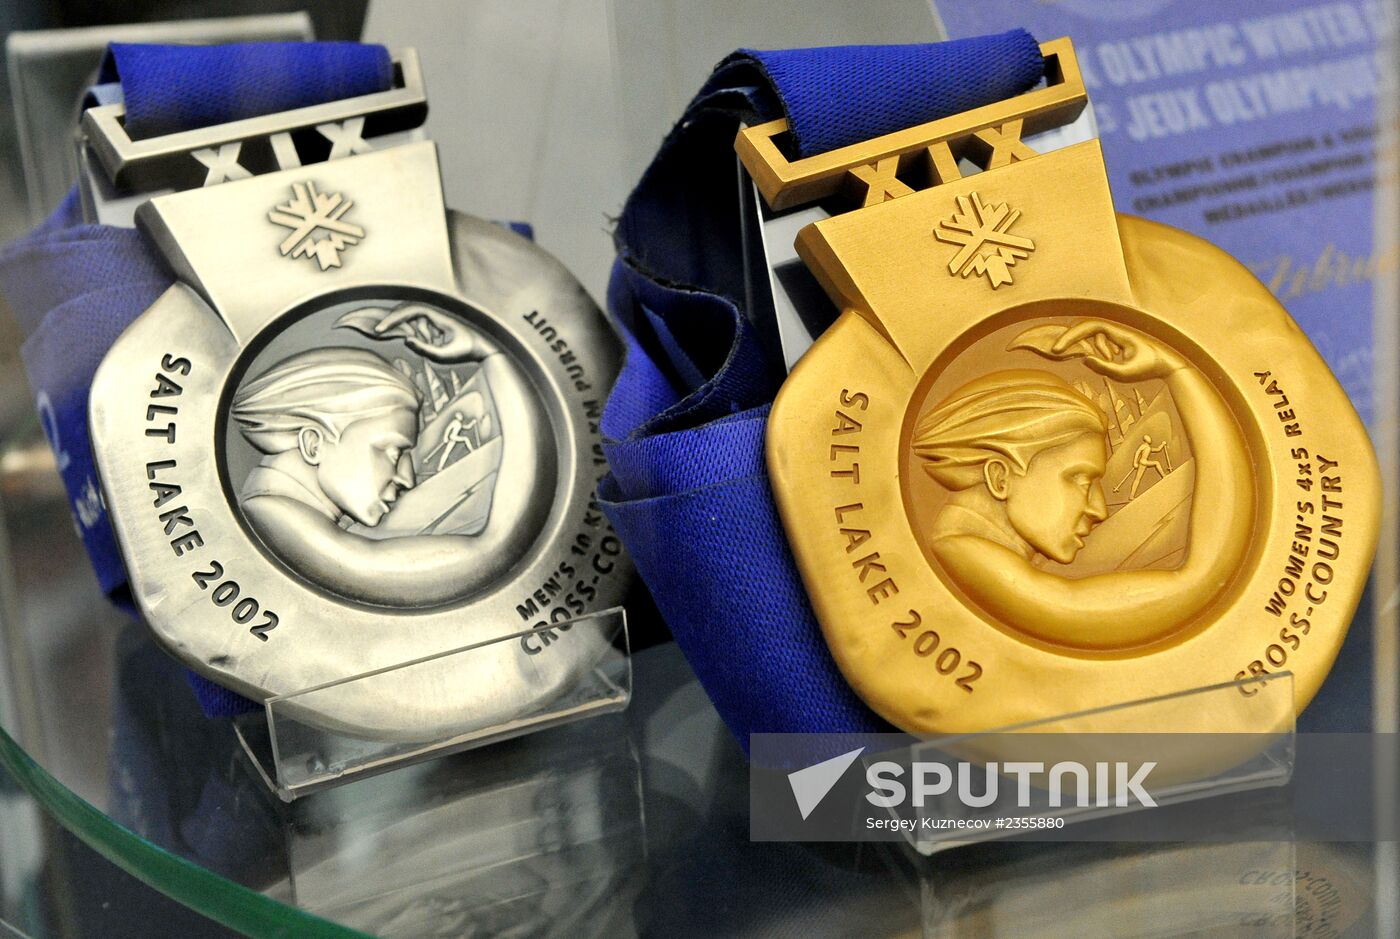 Exhibition of Winter Olympic Games in signs and medals opens